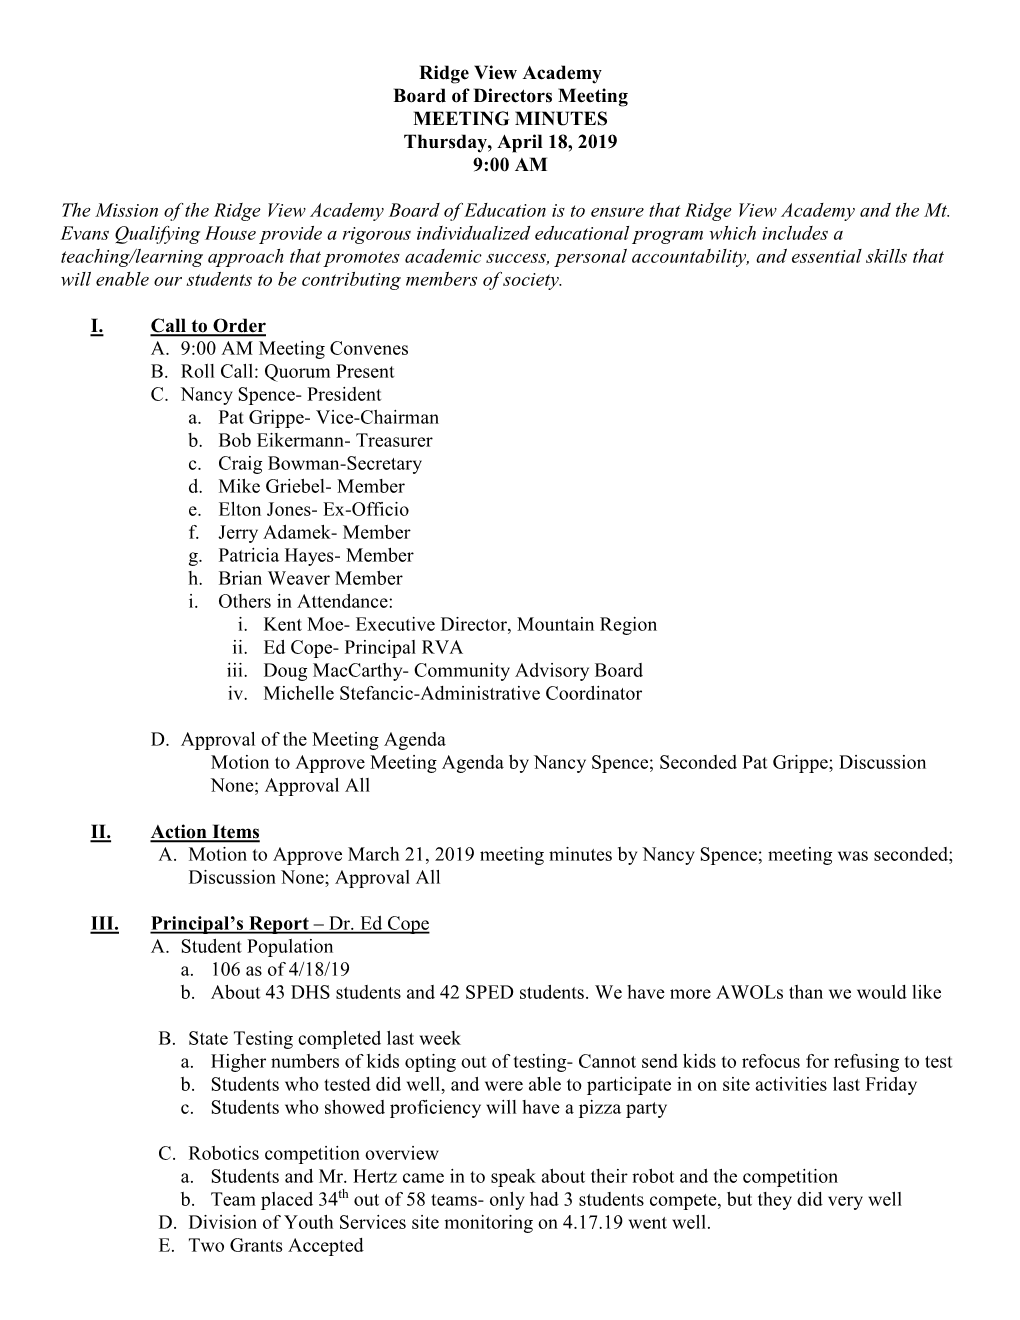 Ridge View Academy Board of Directors Meeting MEETING MINUTES Thursday, April 18, 2019 9:00 AM